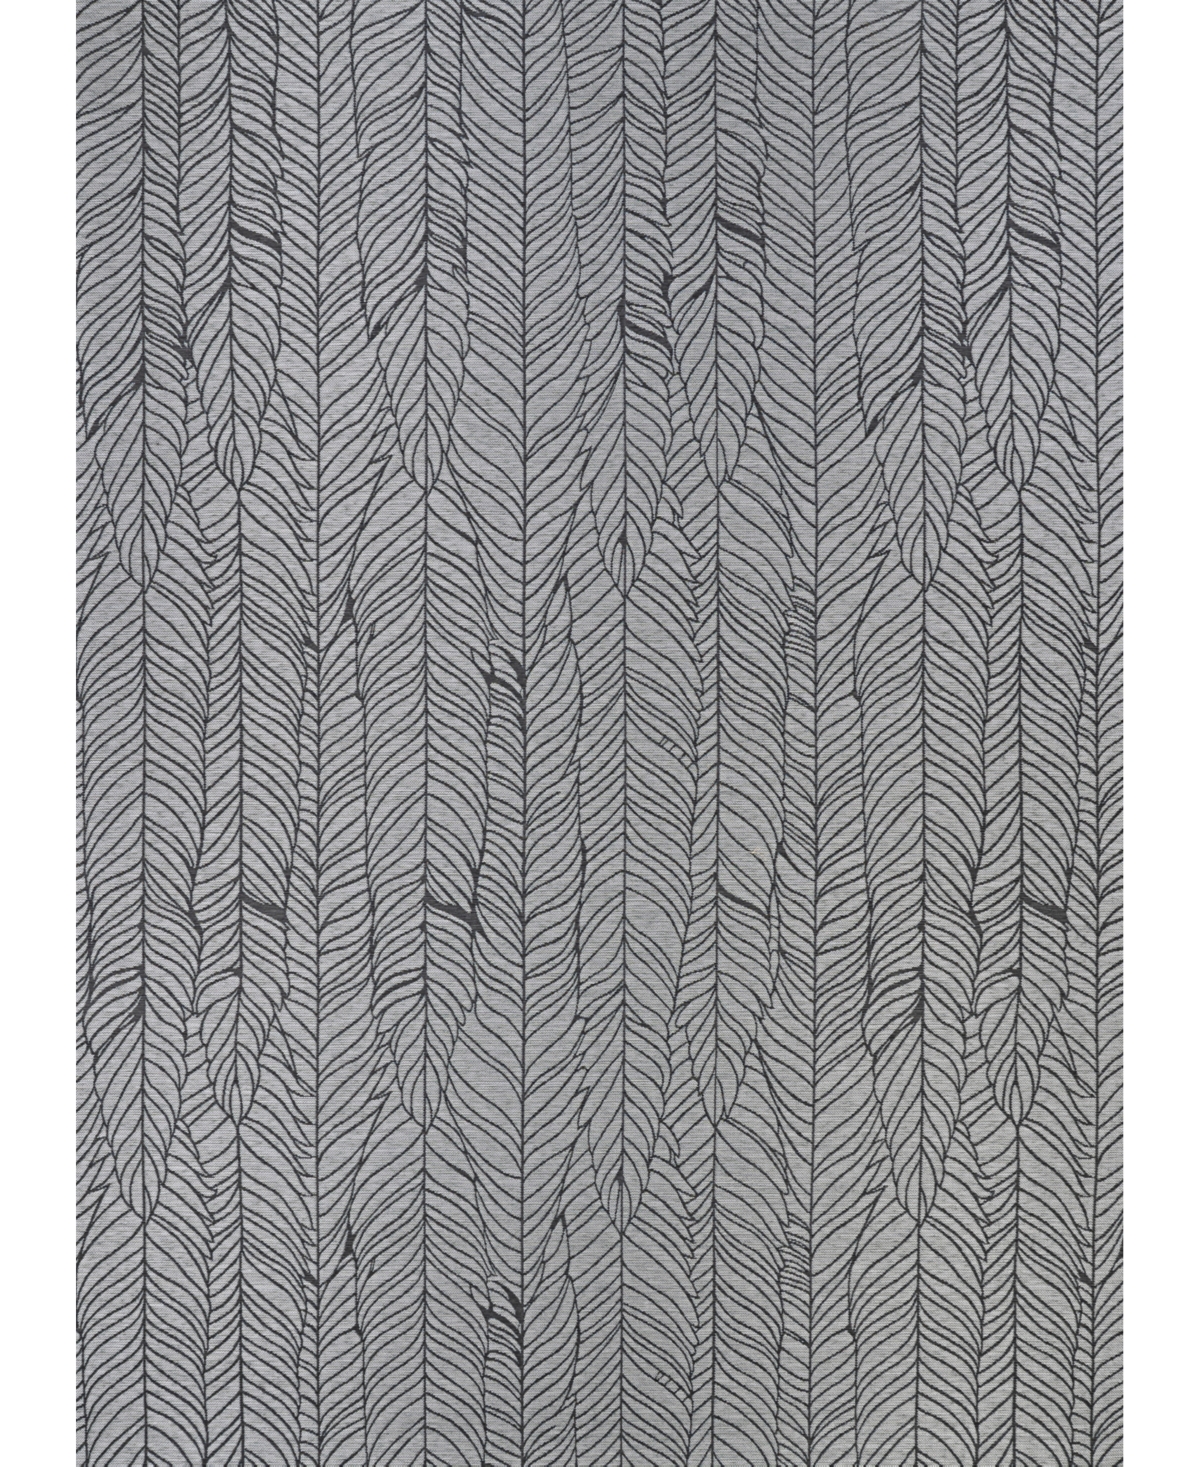 Couristan Dolce Majorelle 4' X 5'10" Area Rug In Silver